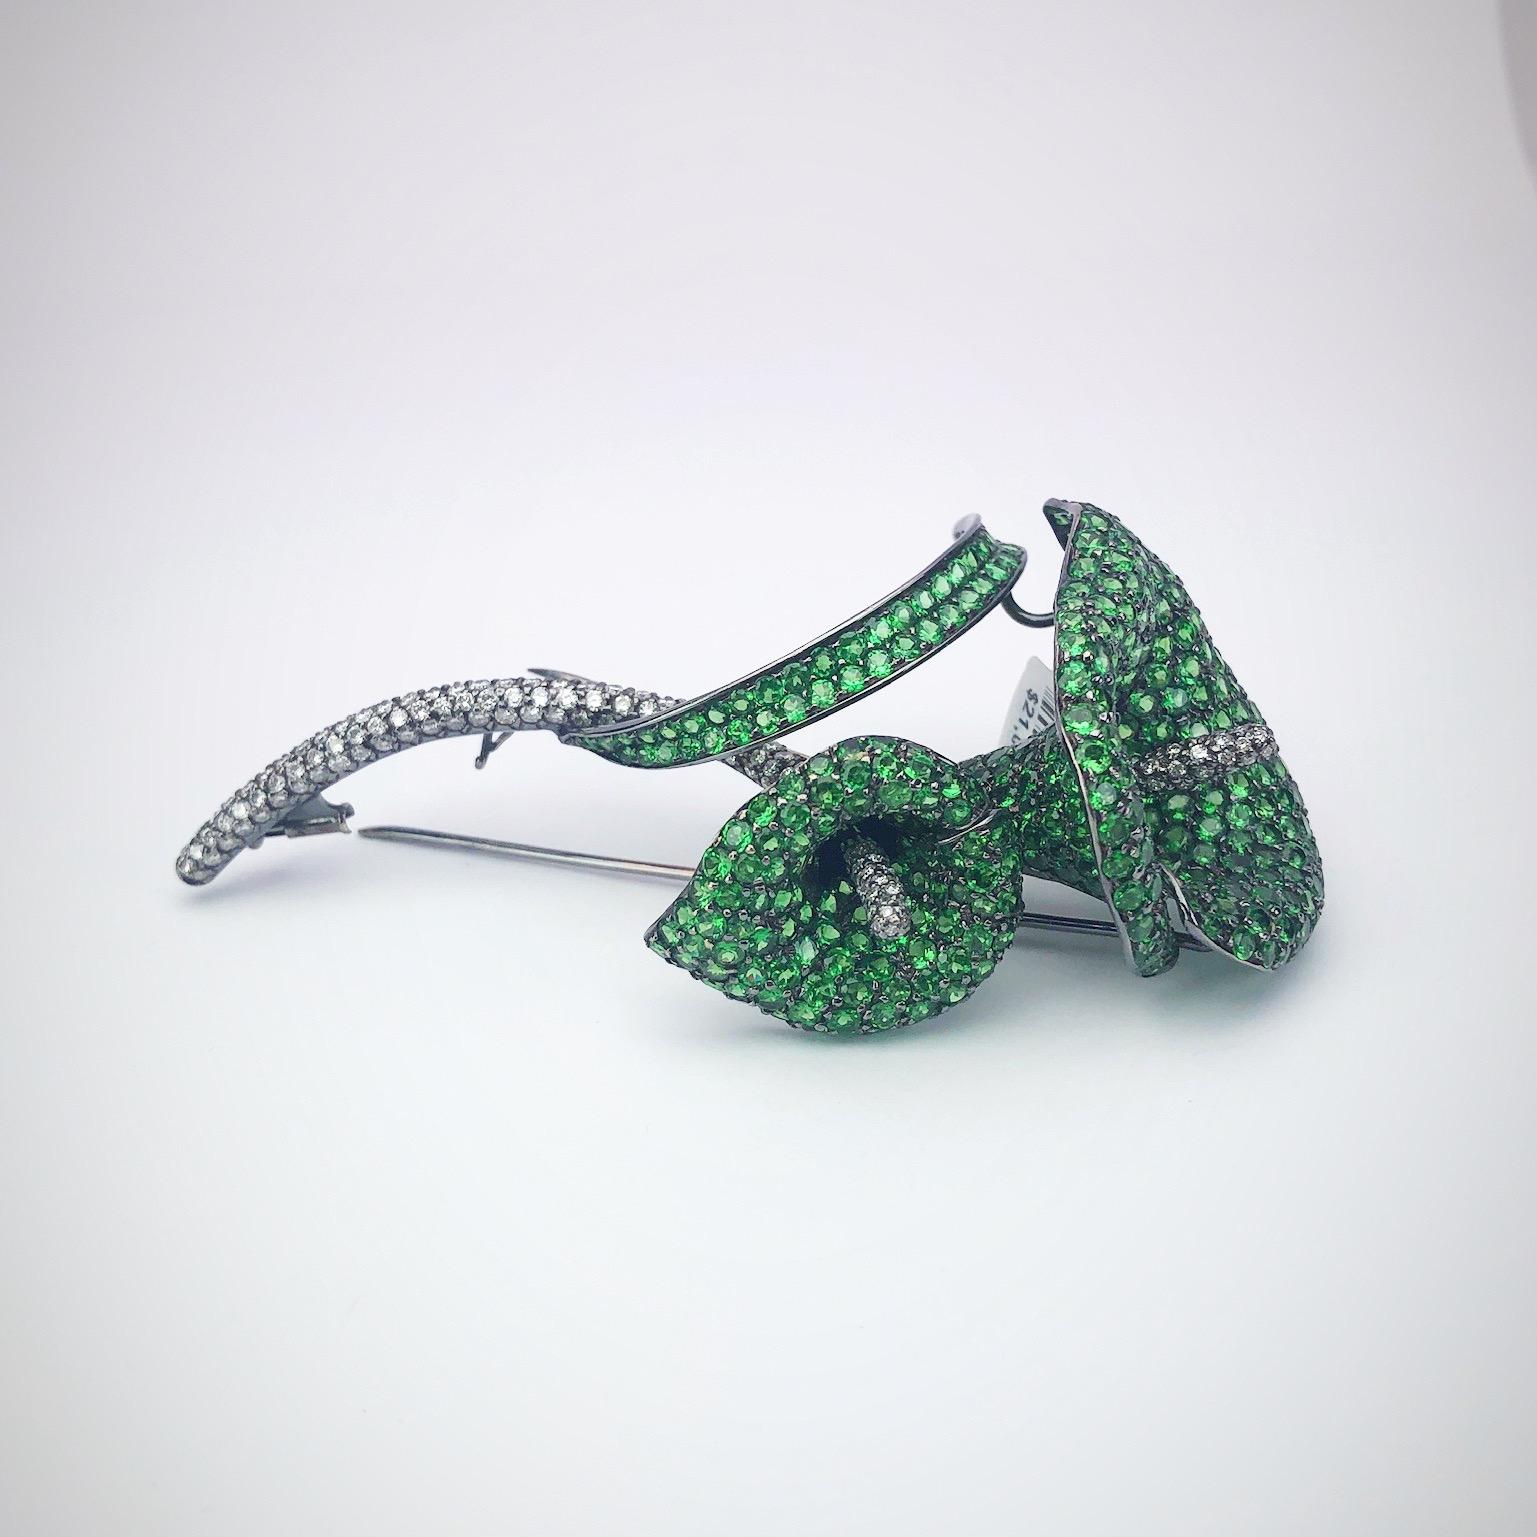 A three dimensional calla lily brooch. The two flowers are set entirely with green garnets and round brilliant diamonds. The stones are set in blackened gold for a dramatic effect. The flowers measure 3.75